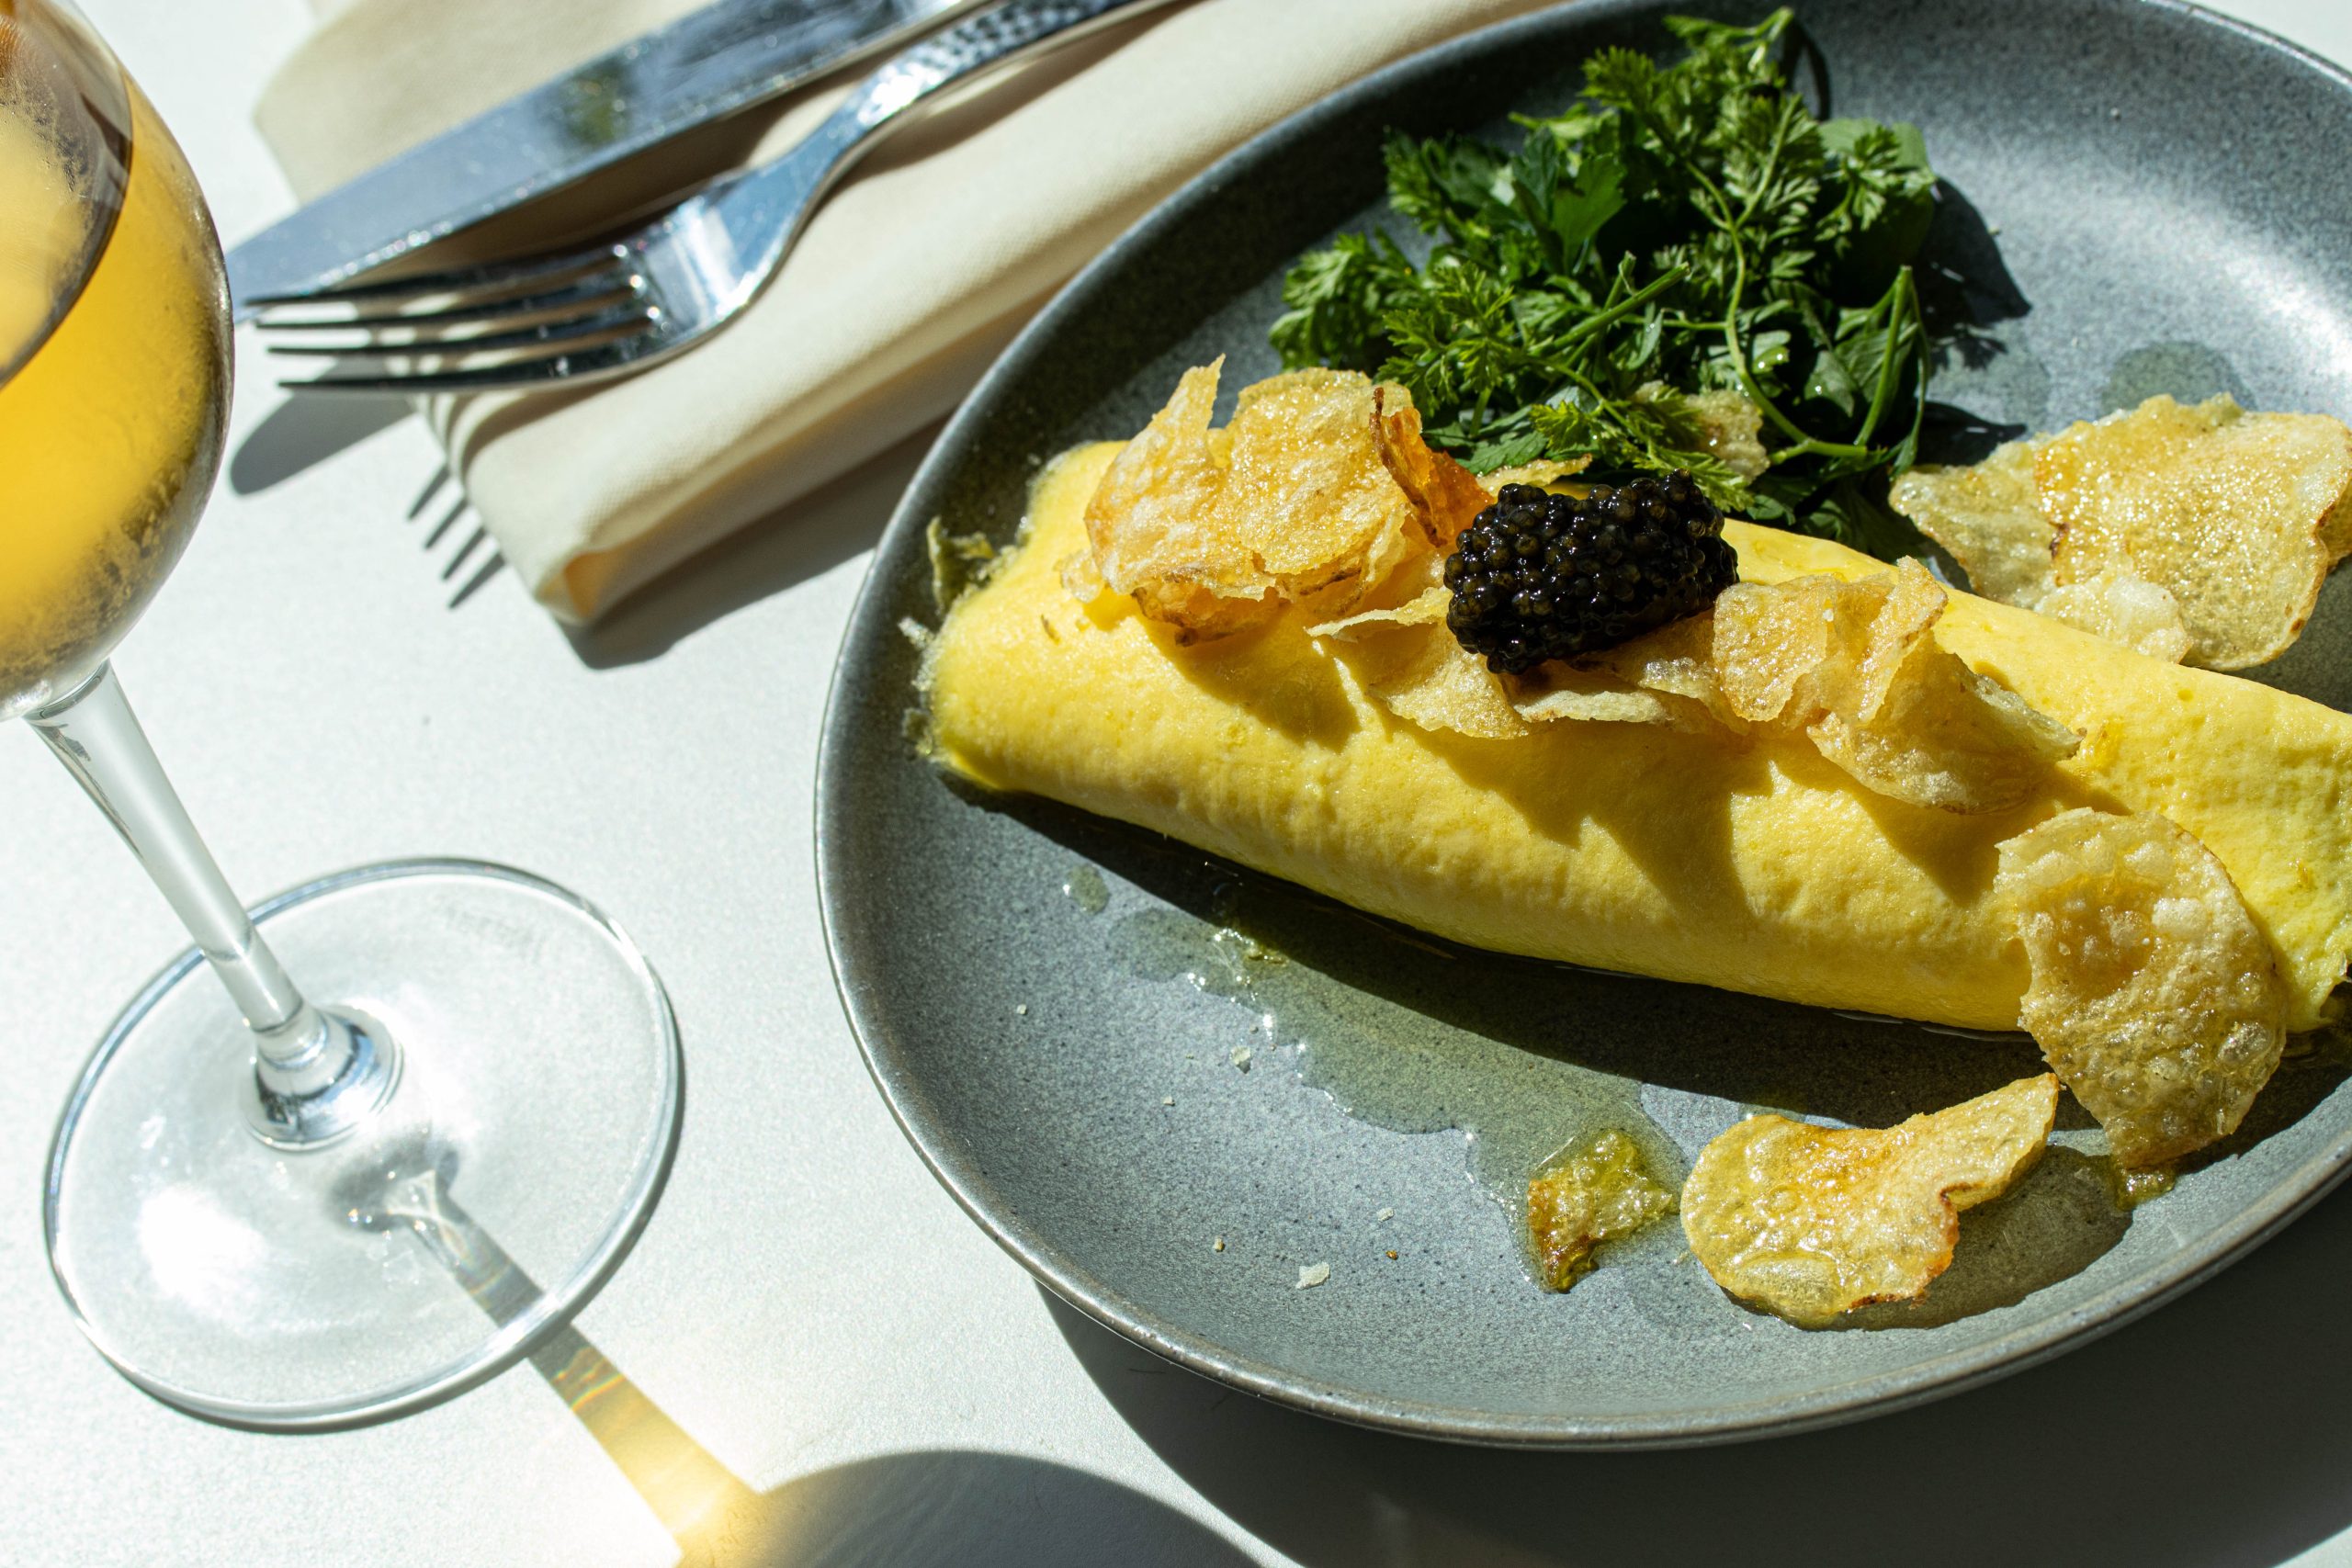 The Fancy Omelette from Any Day Now in Washington, D.C.